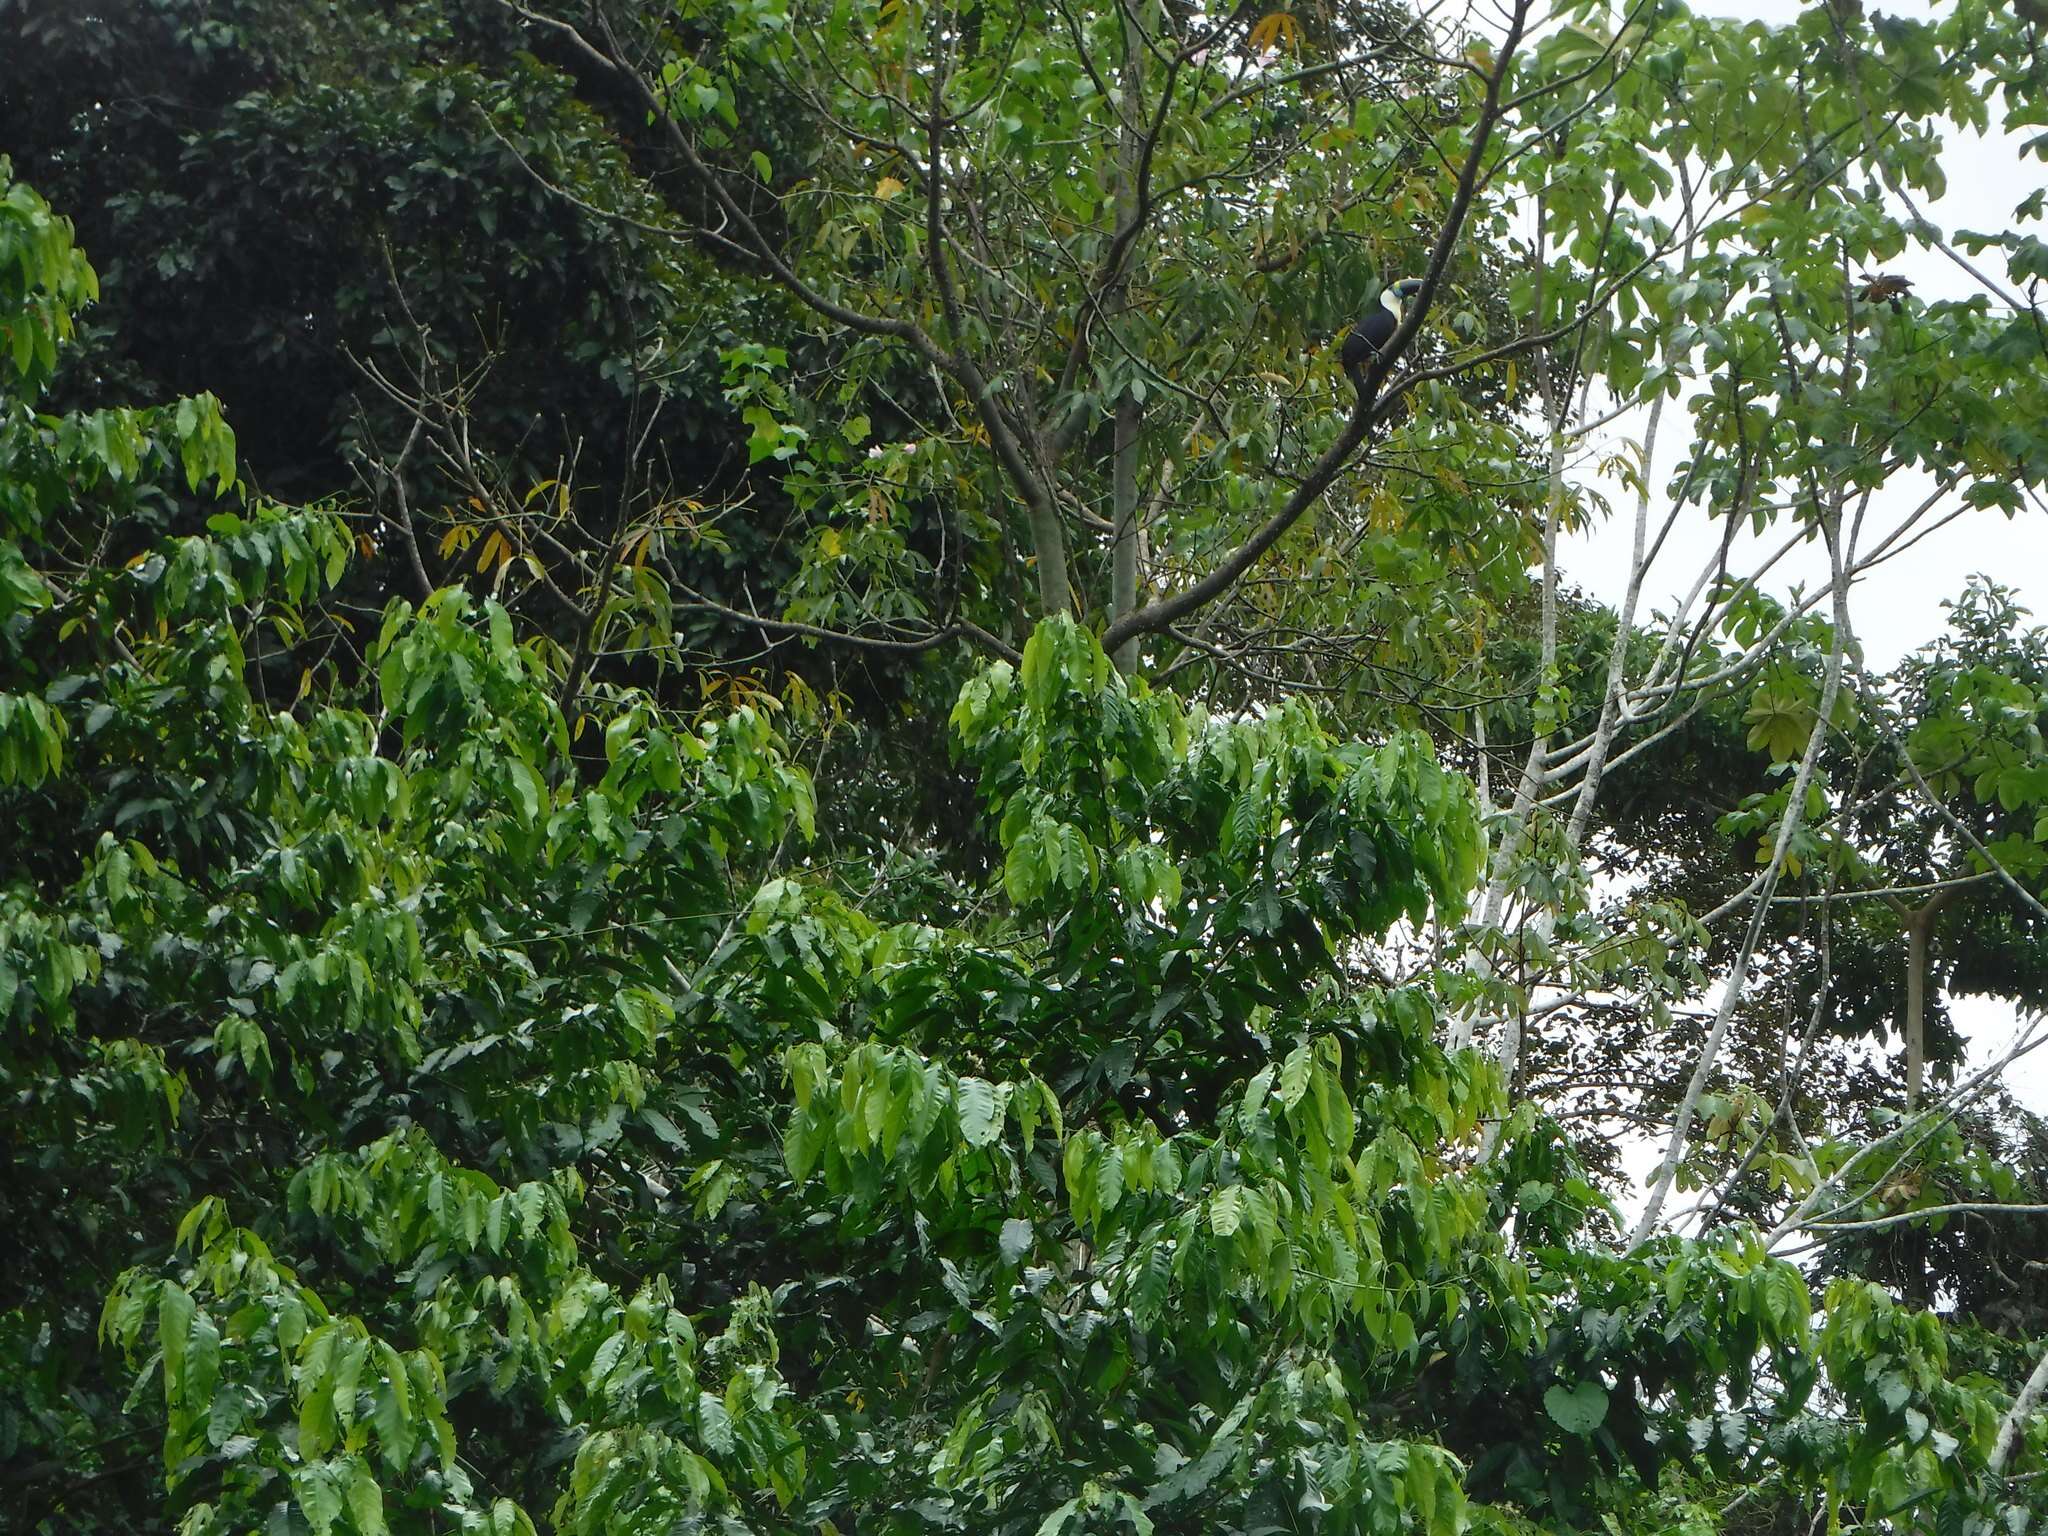 Image of Red-billed Toucan